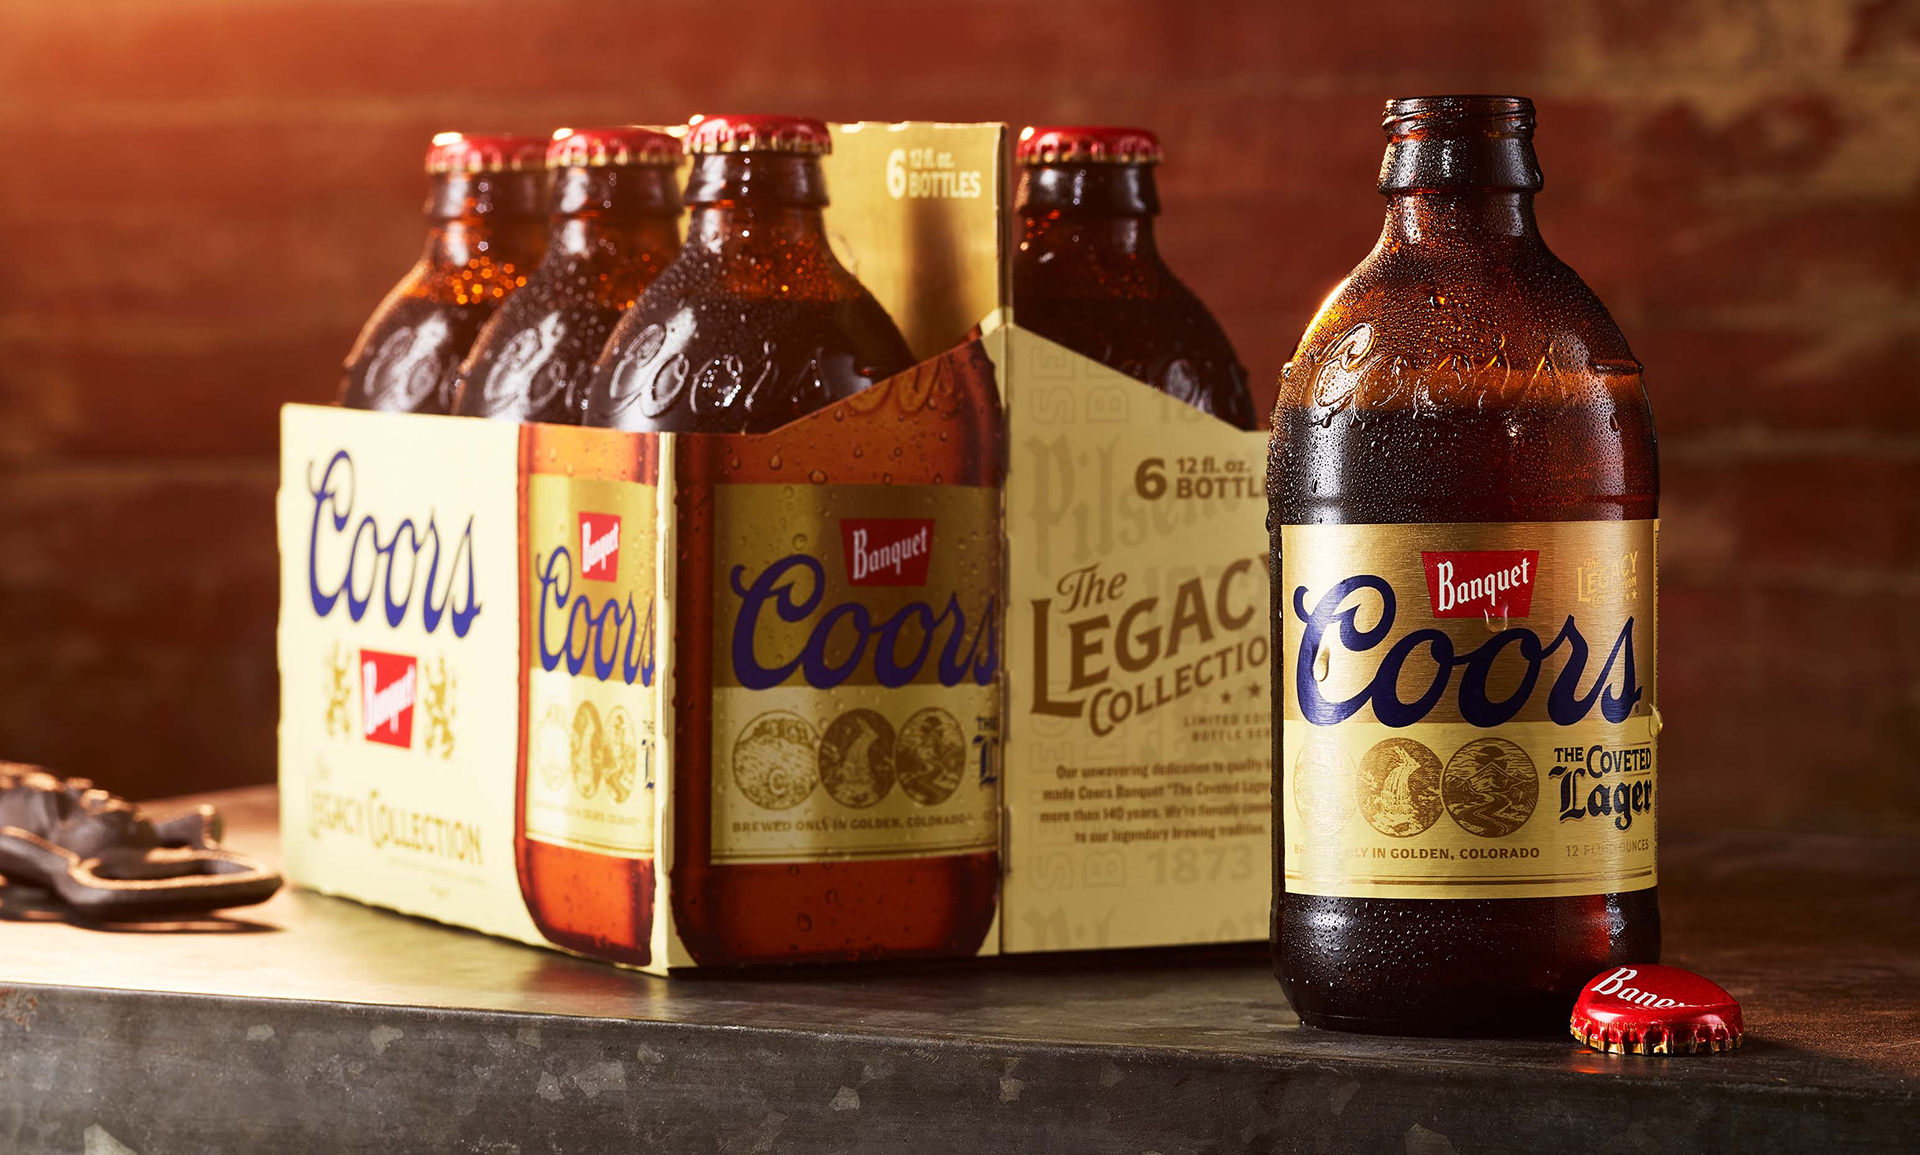 Molson Coors – Banquet Legacy Collection